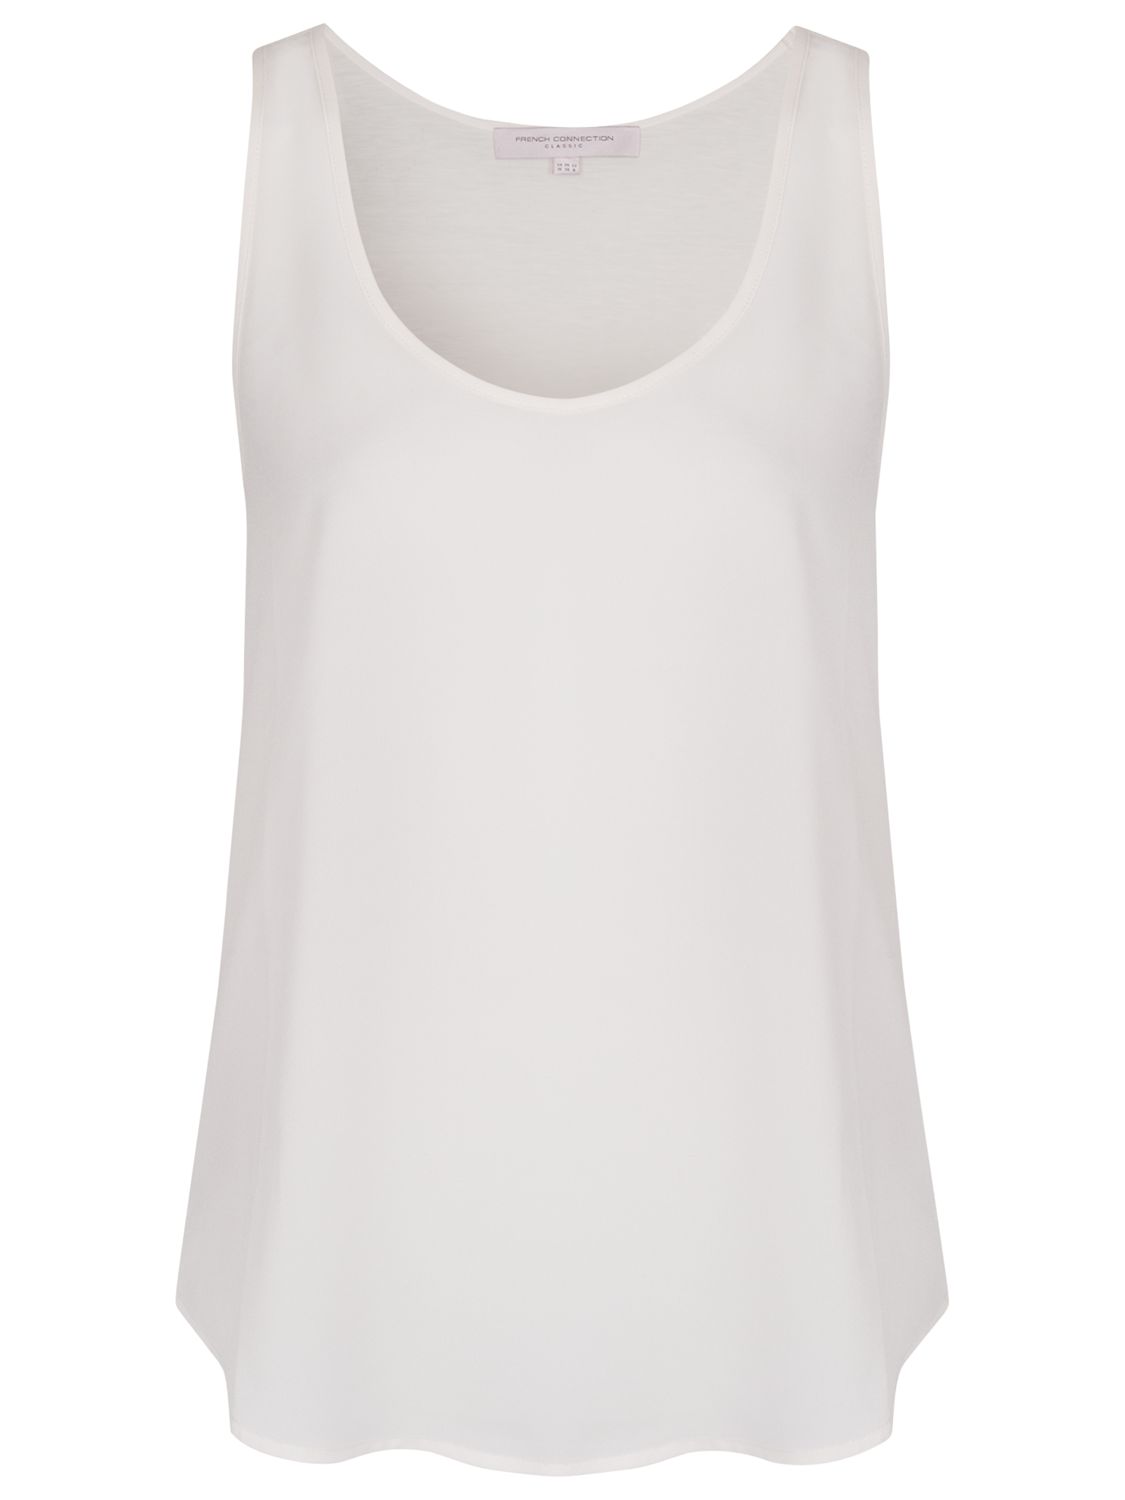 Buy French Connection Polly Plains Vest Top, Classic Cream | John Lewis